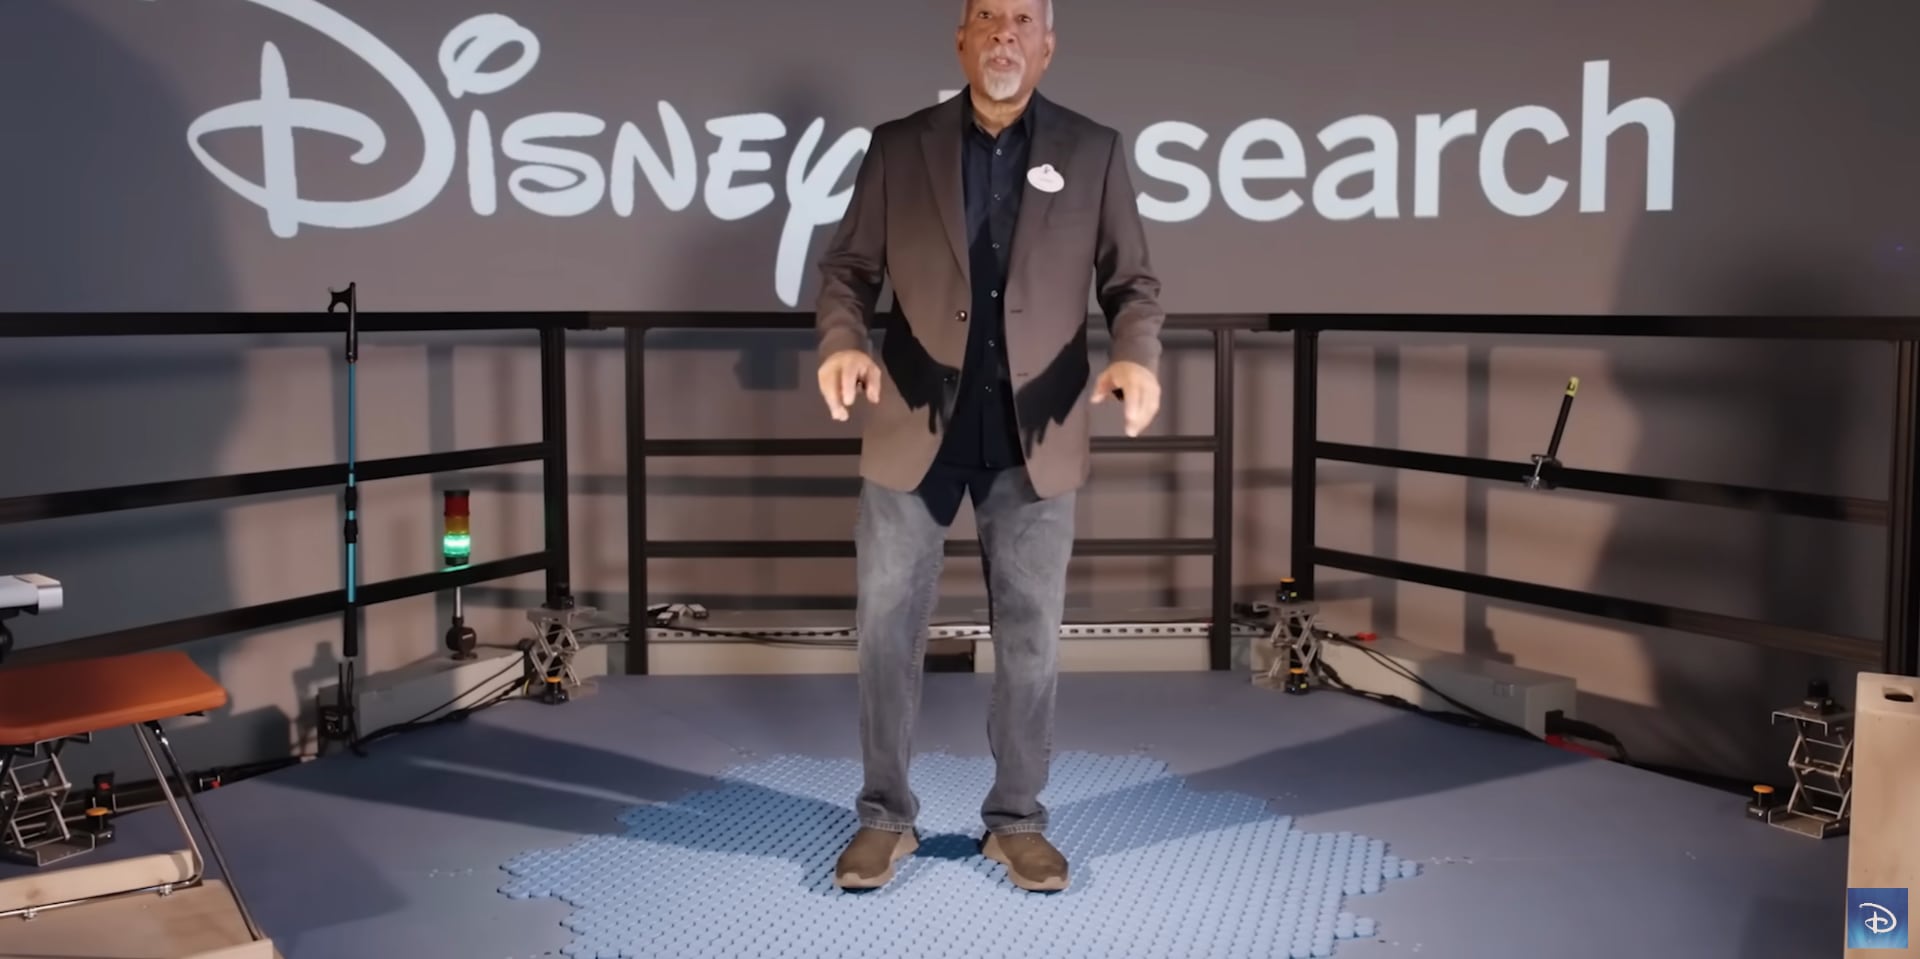 Disney HoloTile: the world's first omnidirectional floor for multi-user VR experiences (video)